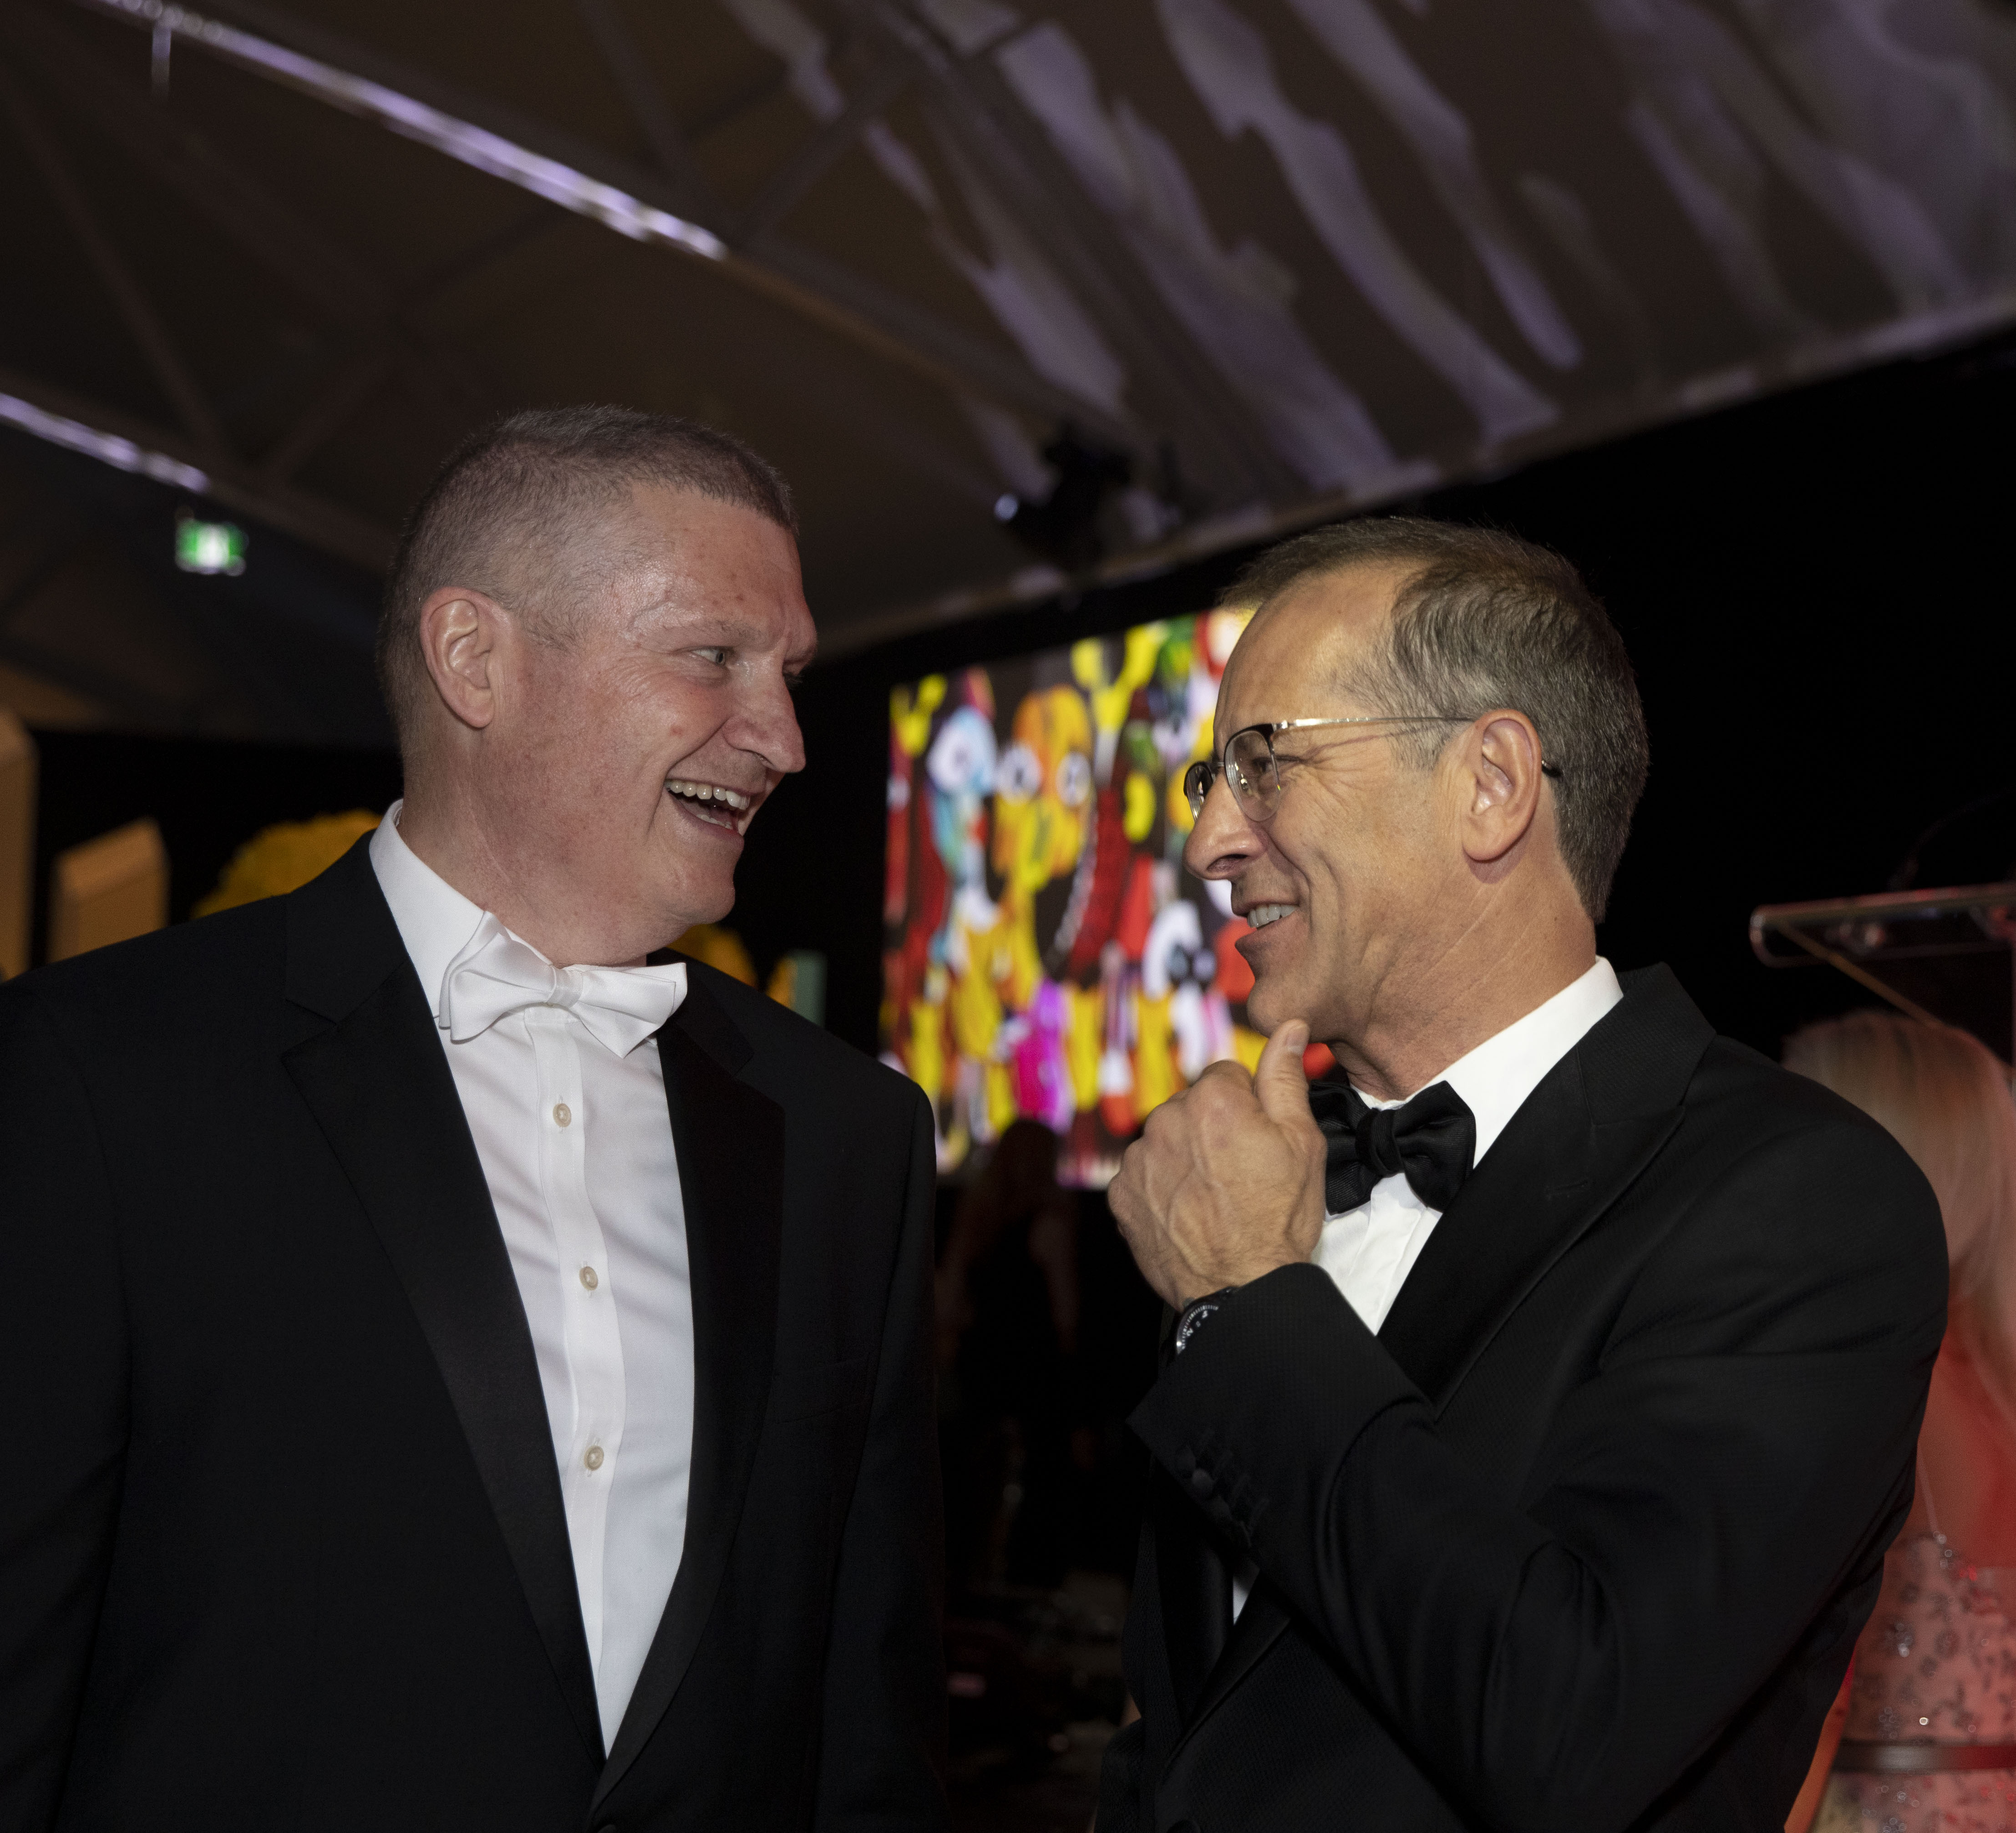 MONTREAL, QUE.: April 25, 2019-- Co-Chairmen Paul Lepage, left, (Intelerad) and Richard Voyer (Soprema)chat during the 2019 Daffodil Ball in Montreal on Thursday April 25, 2019. © Allen McInnis 2019 No third party usage is permitted without prior consent. amcinnis@mcinnis.ca © Allen McInnis 2019